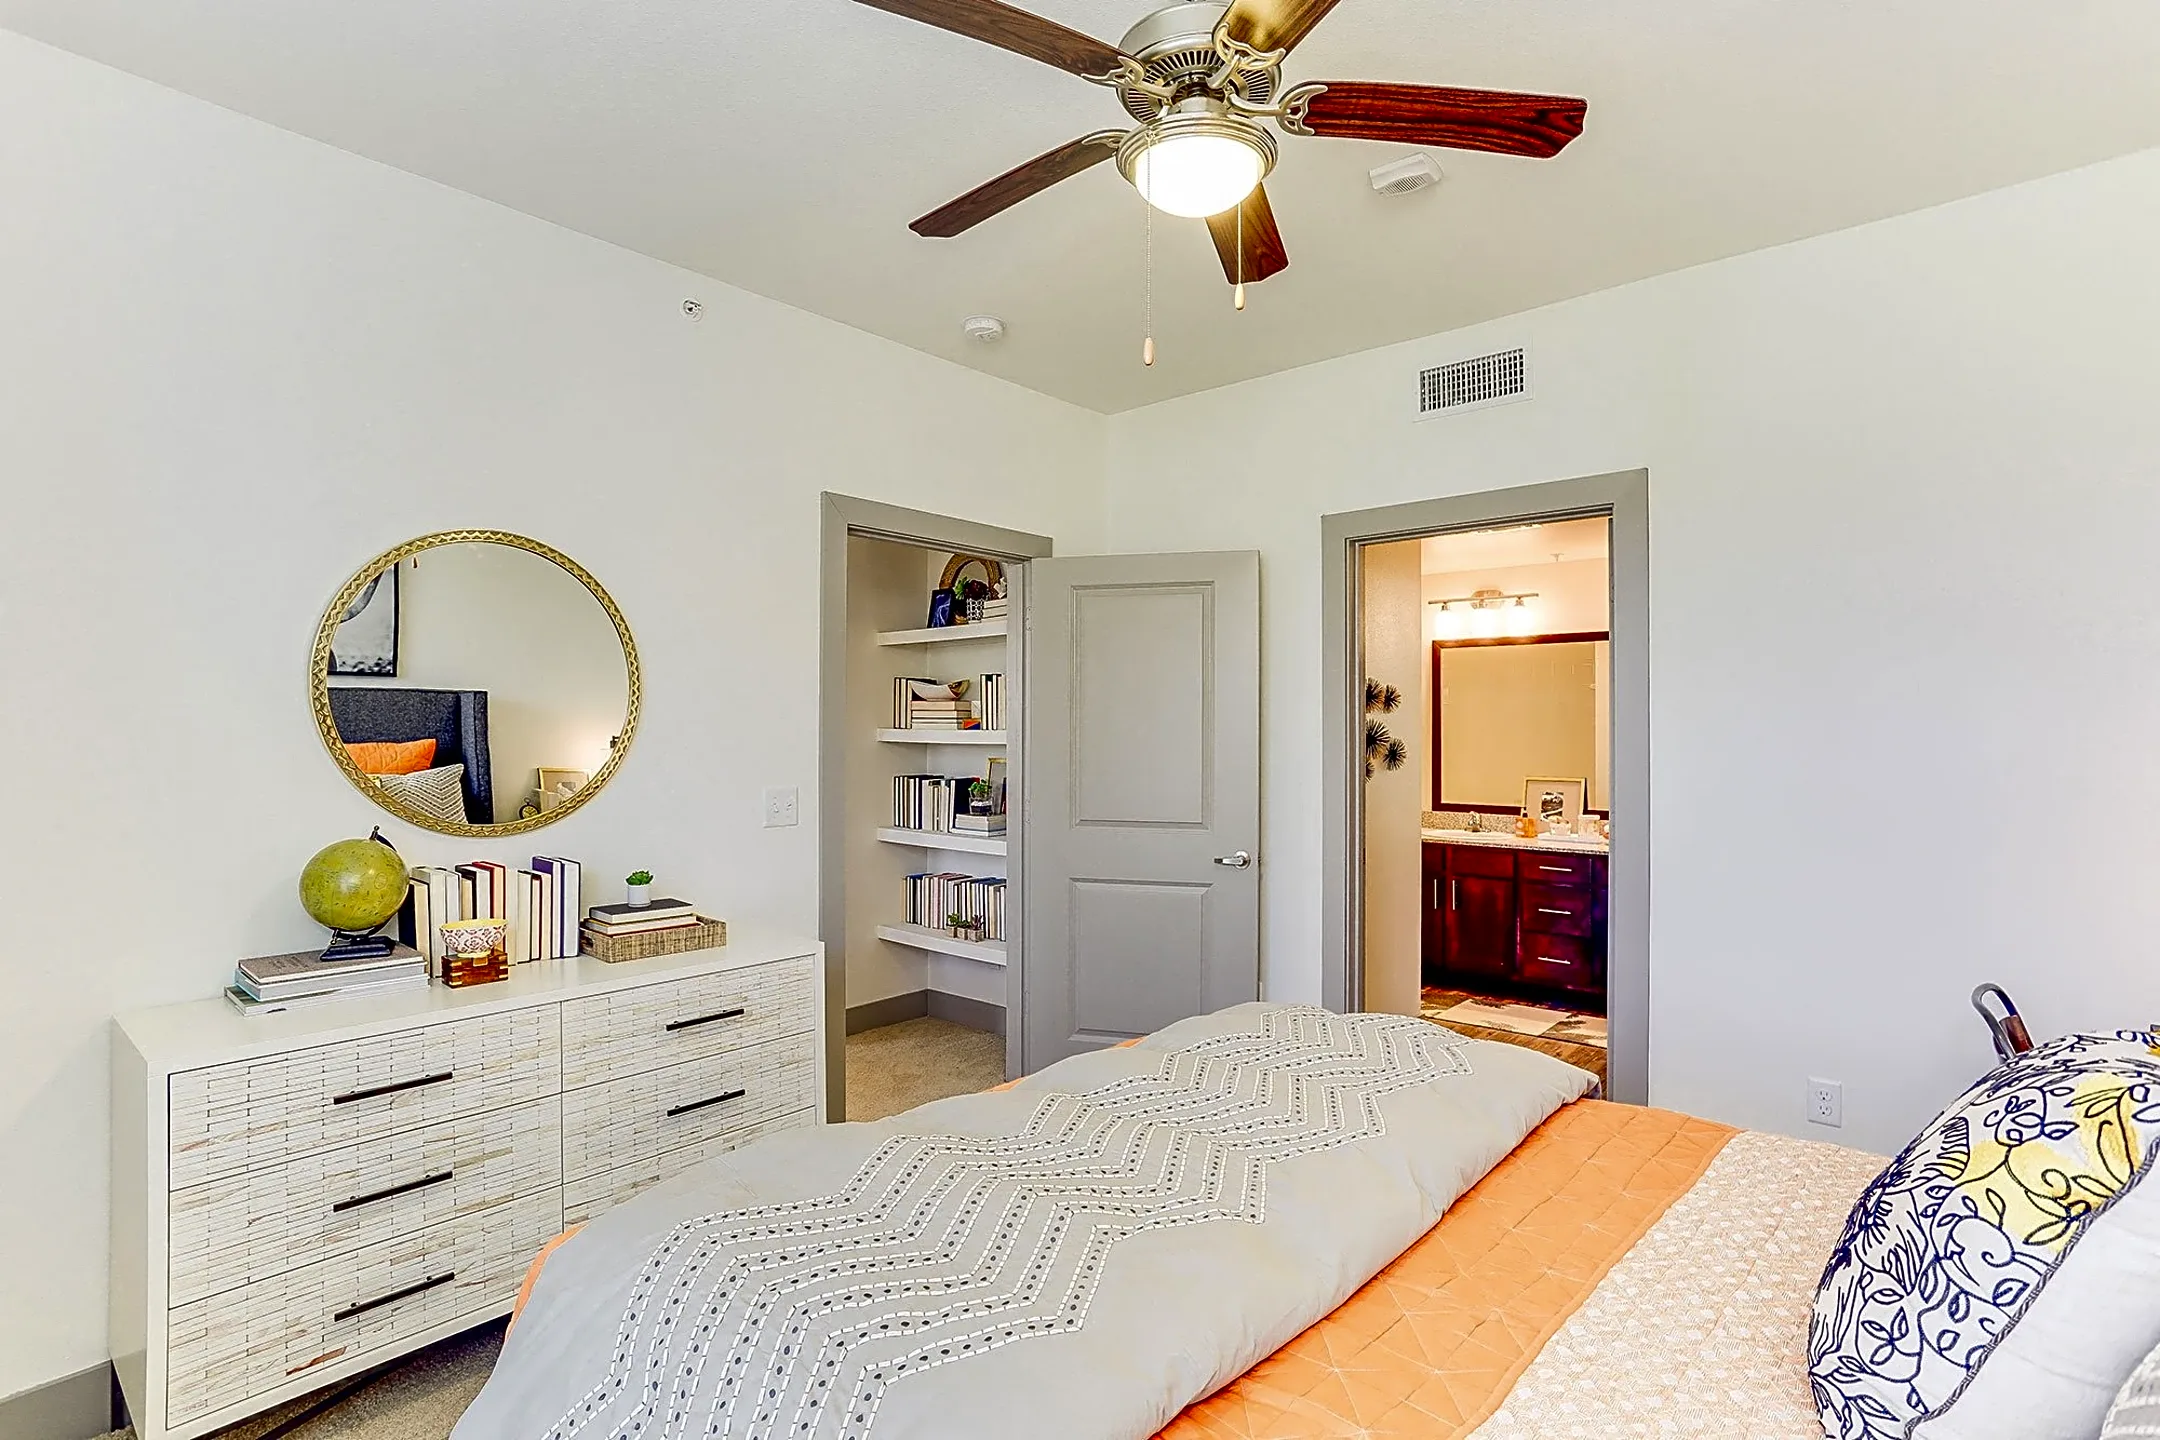 Bedroom - The Bend at Crescent Pointe - College Station, TX